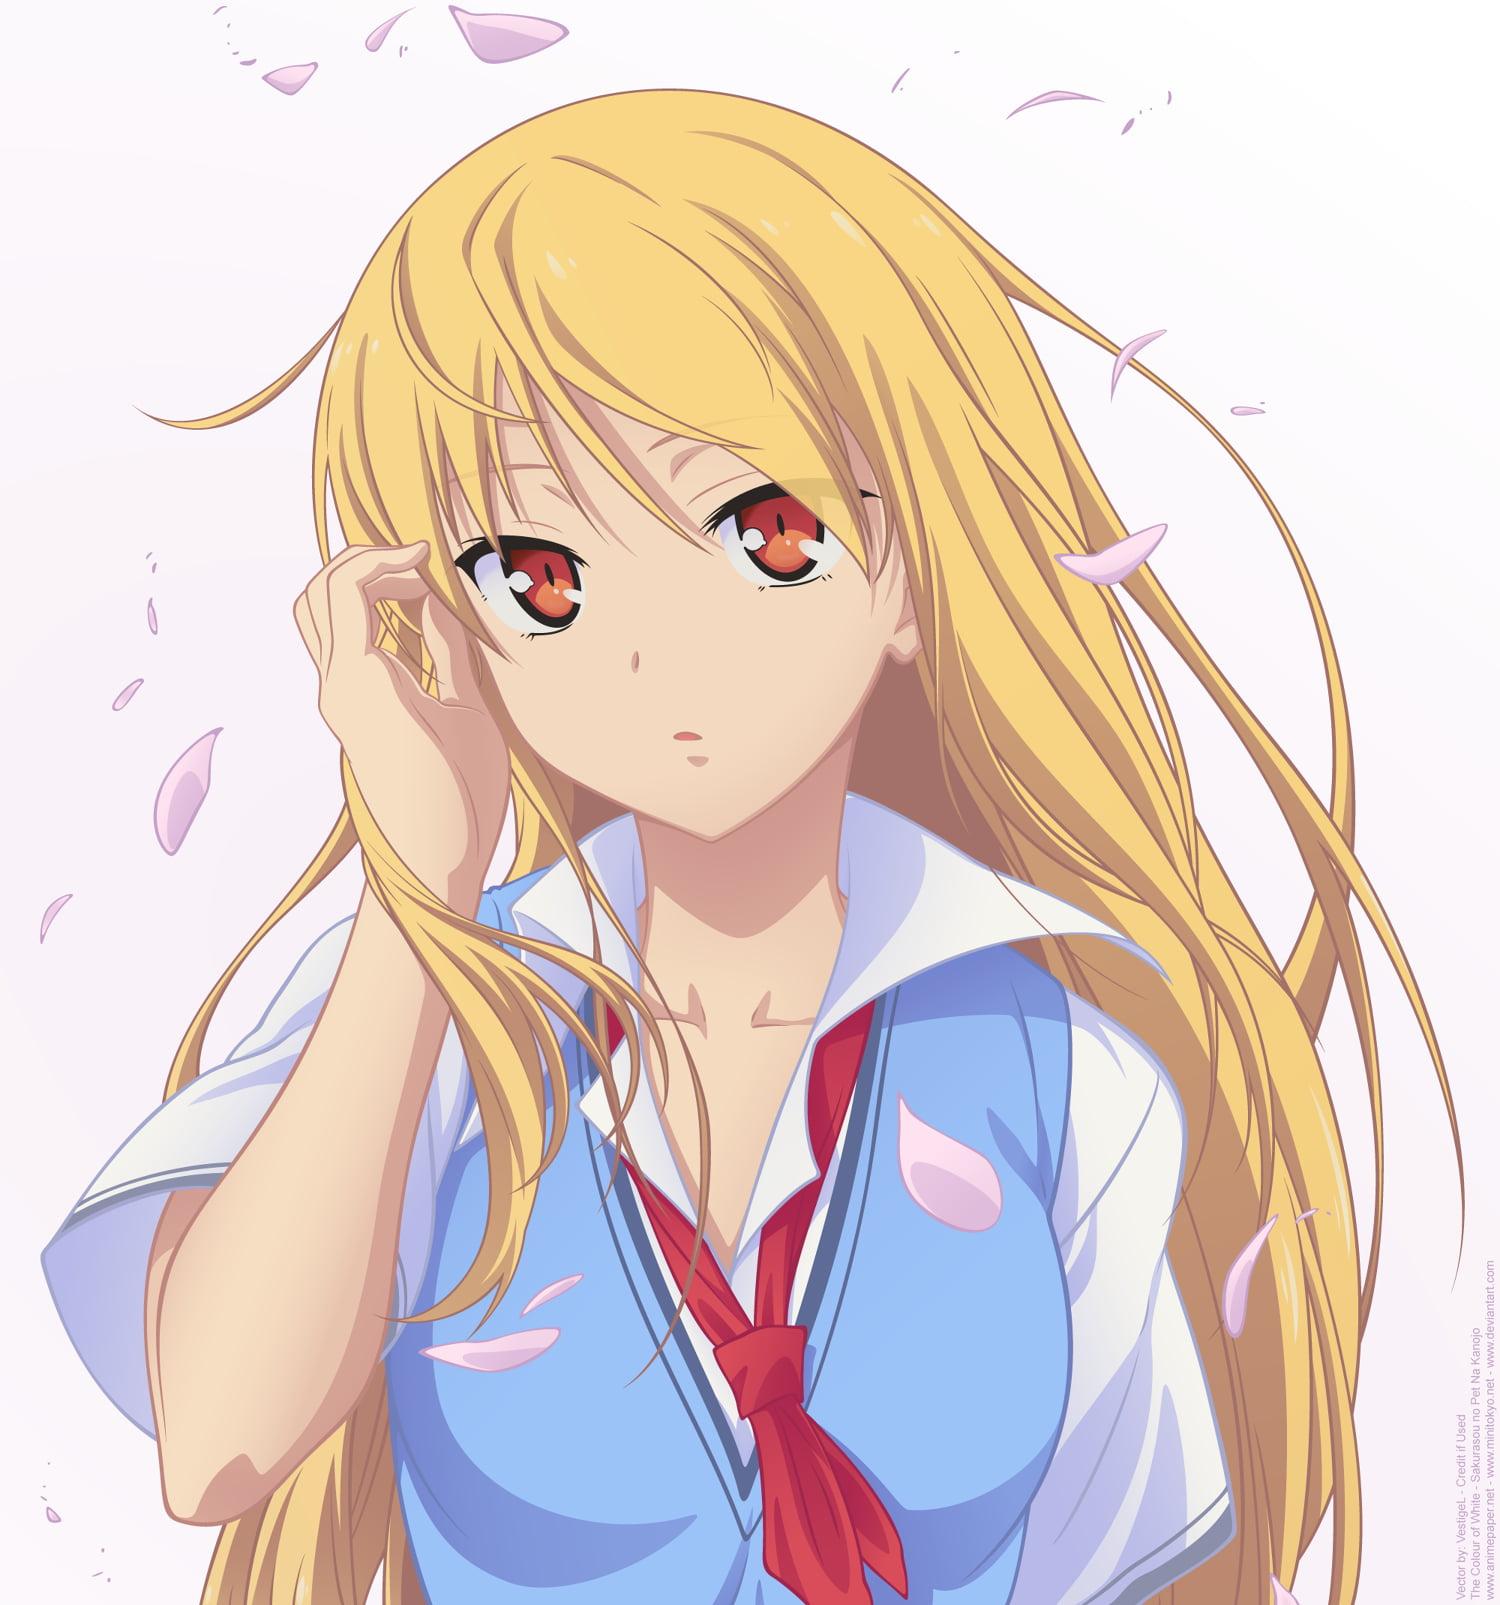 Yellow Haired Female Anime Character Illustration, Anime